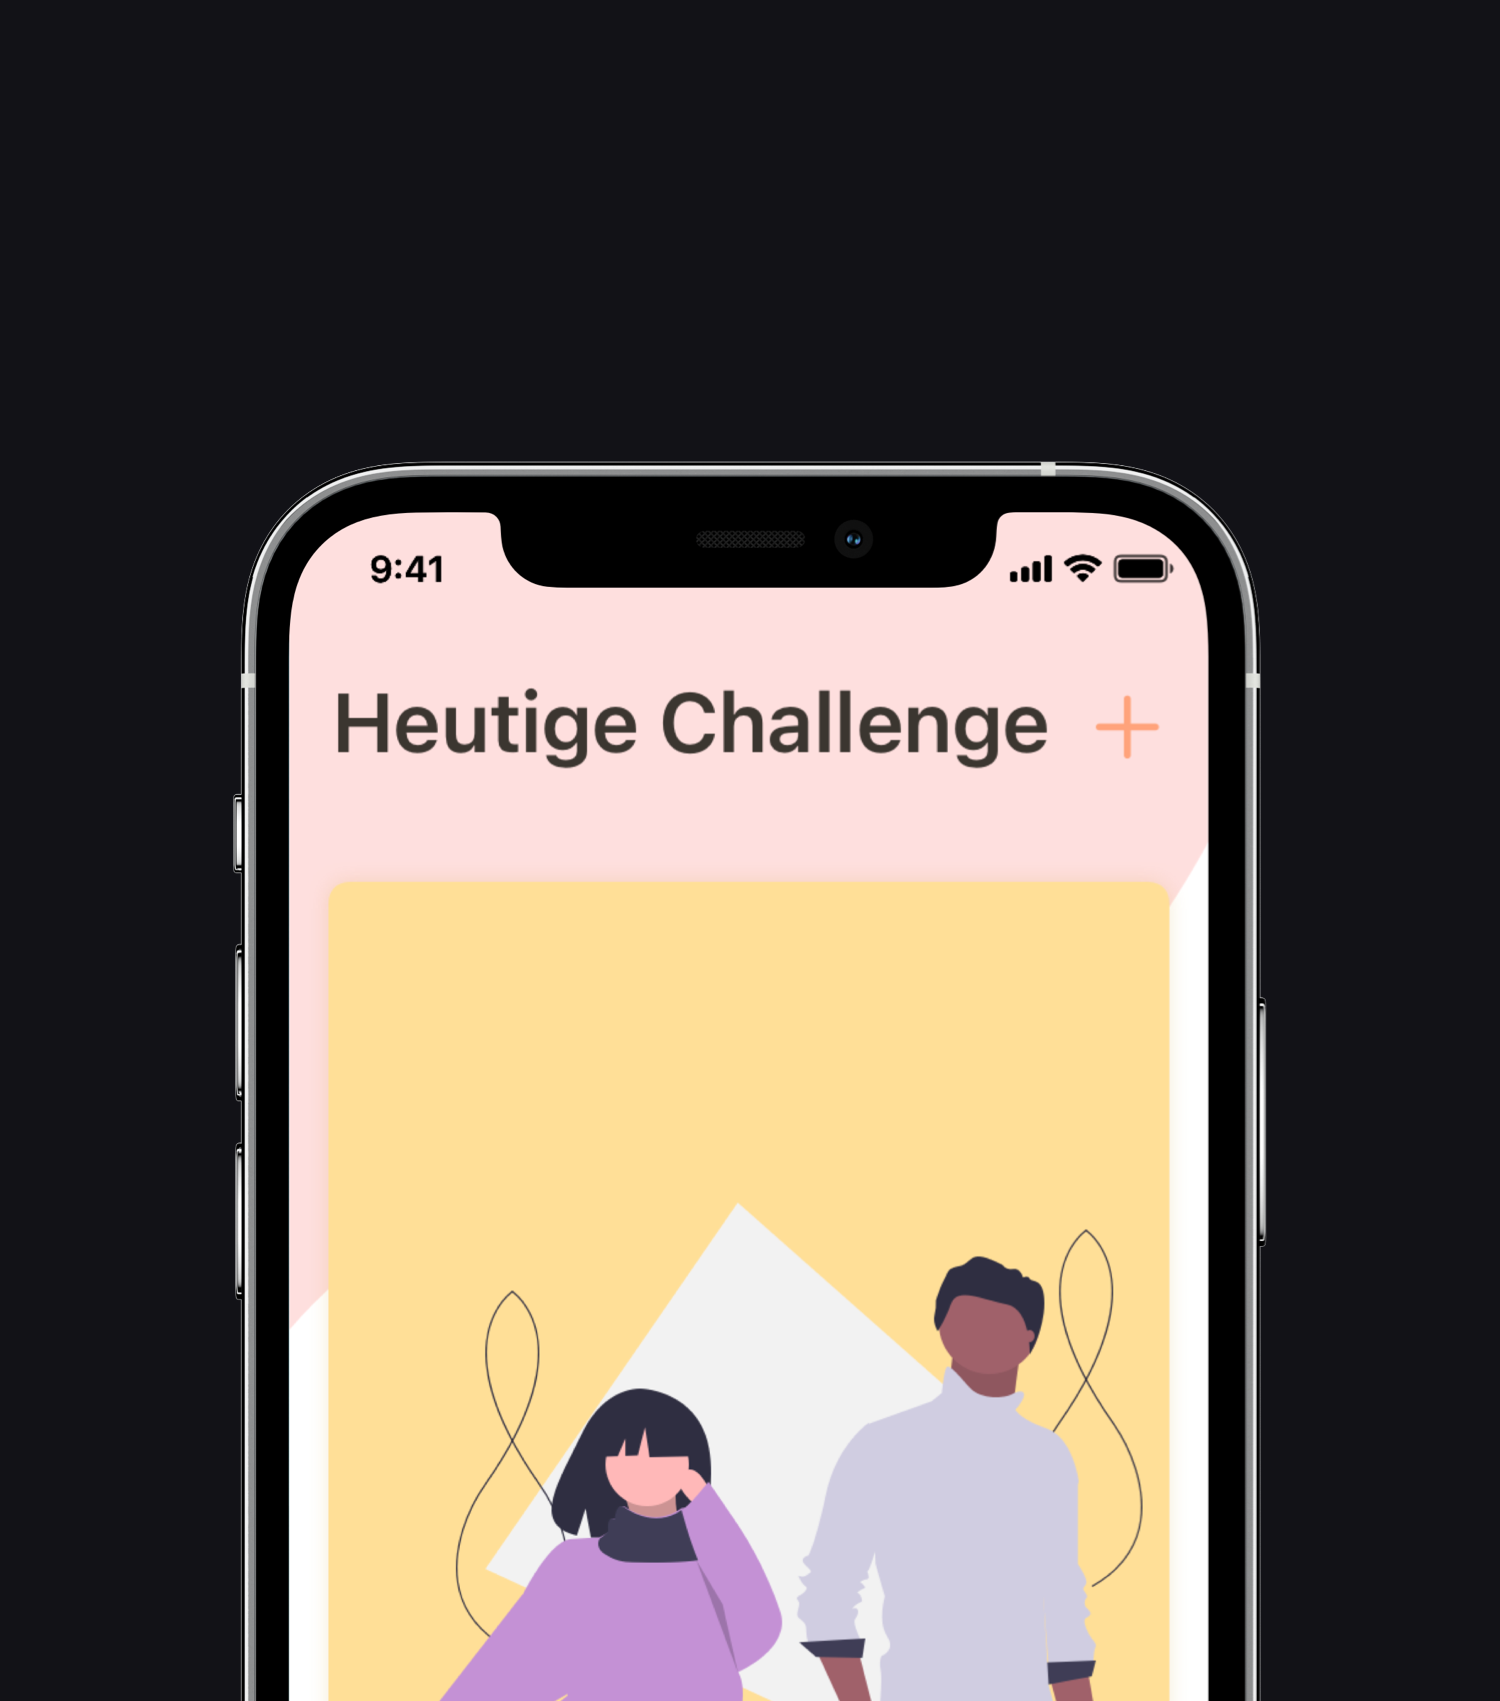 App concept for a challenge yourself type app